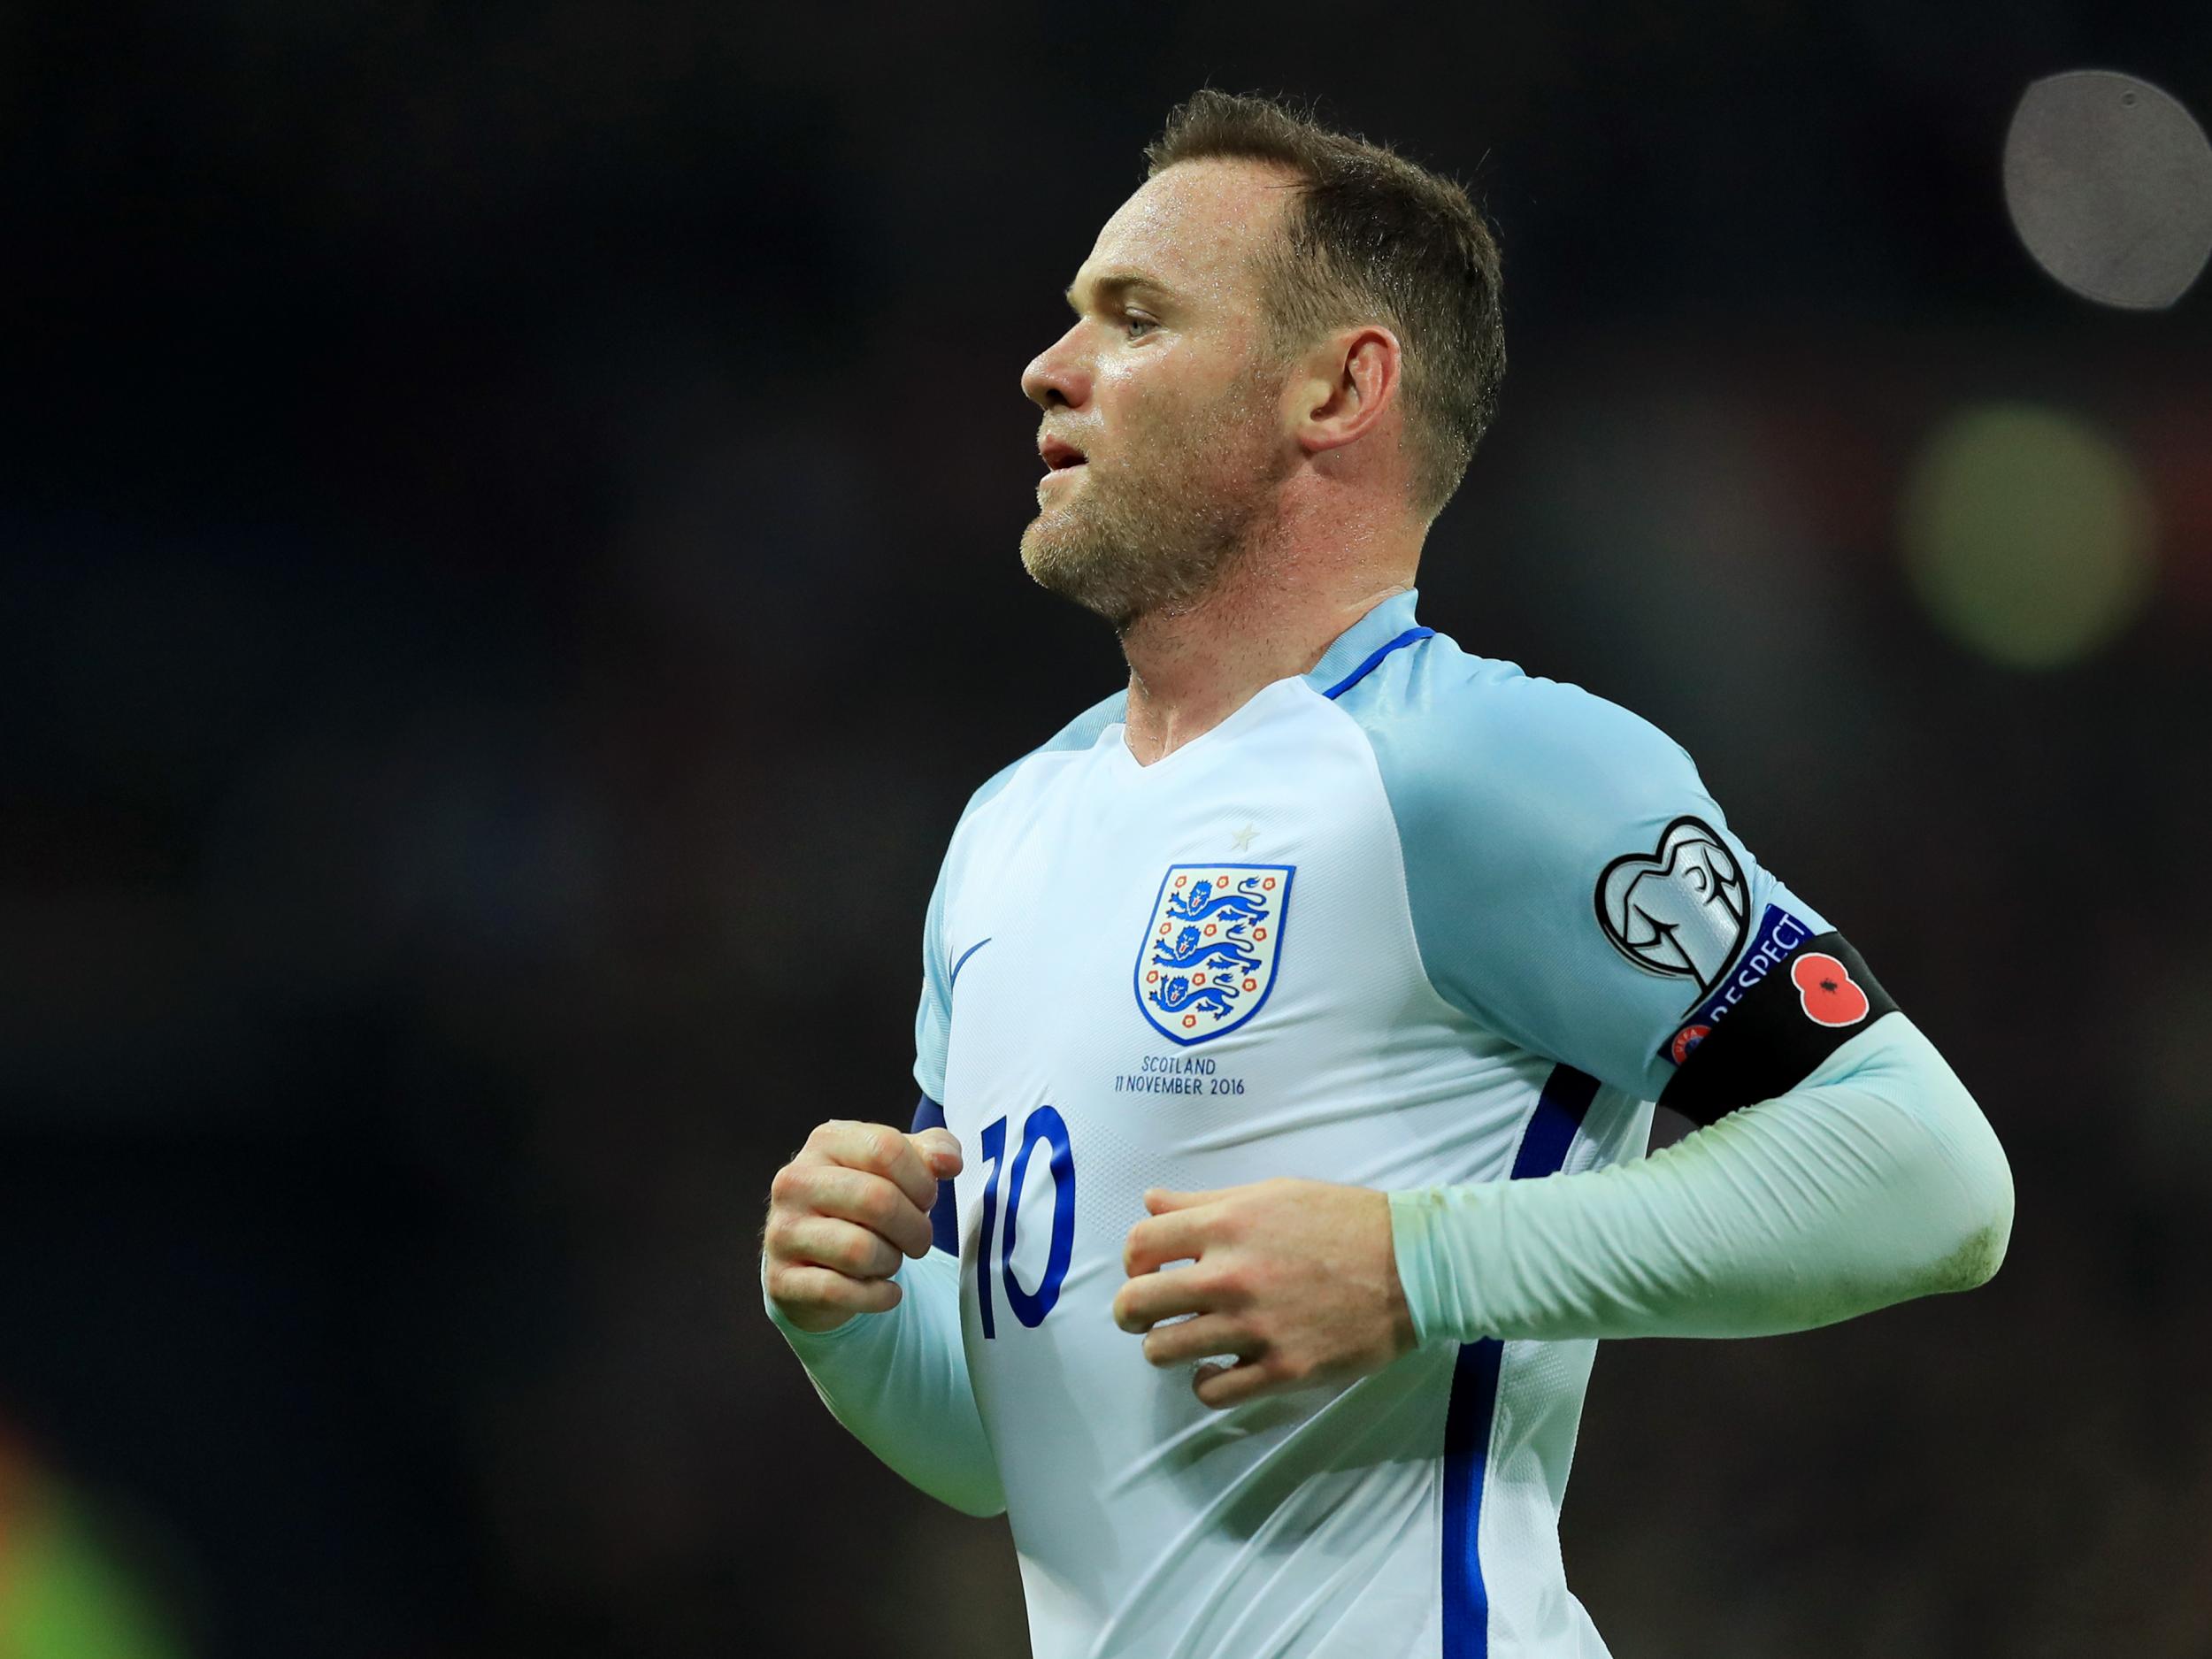 Rooney was ruled out of the Spain game through injury